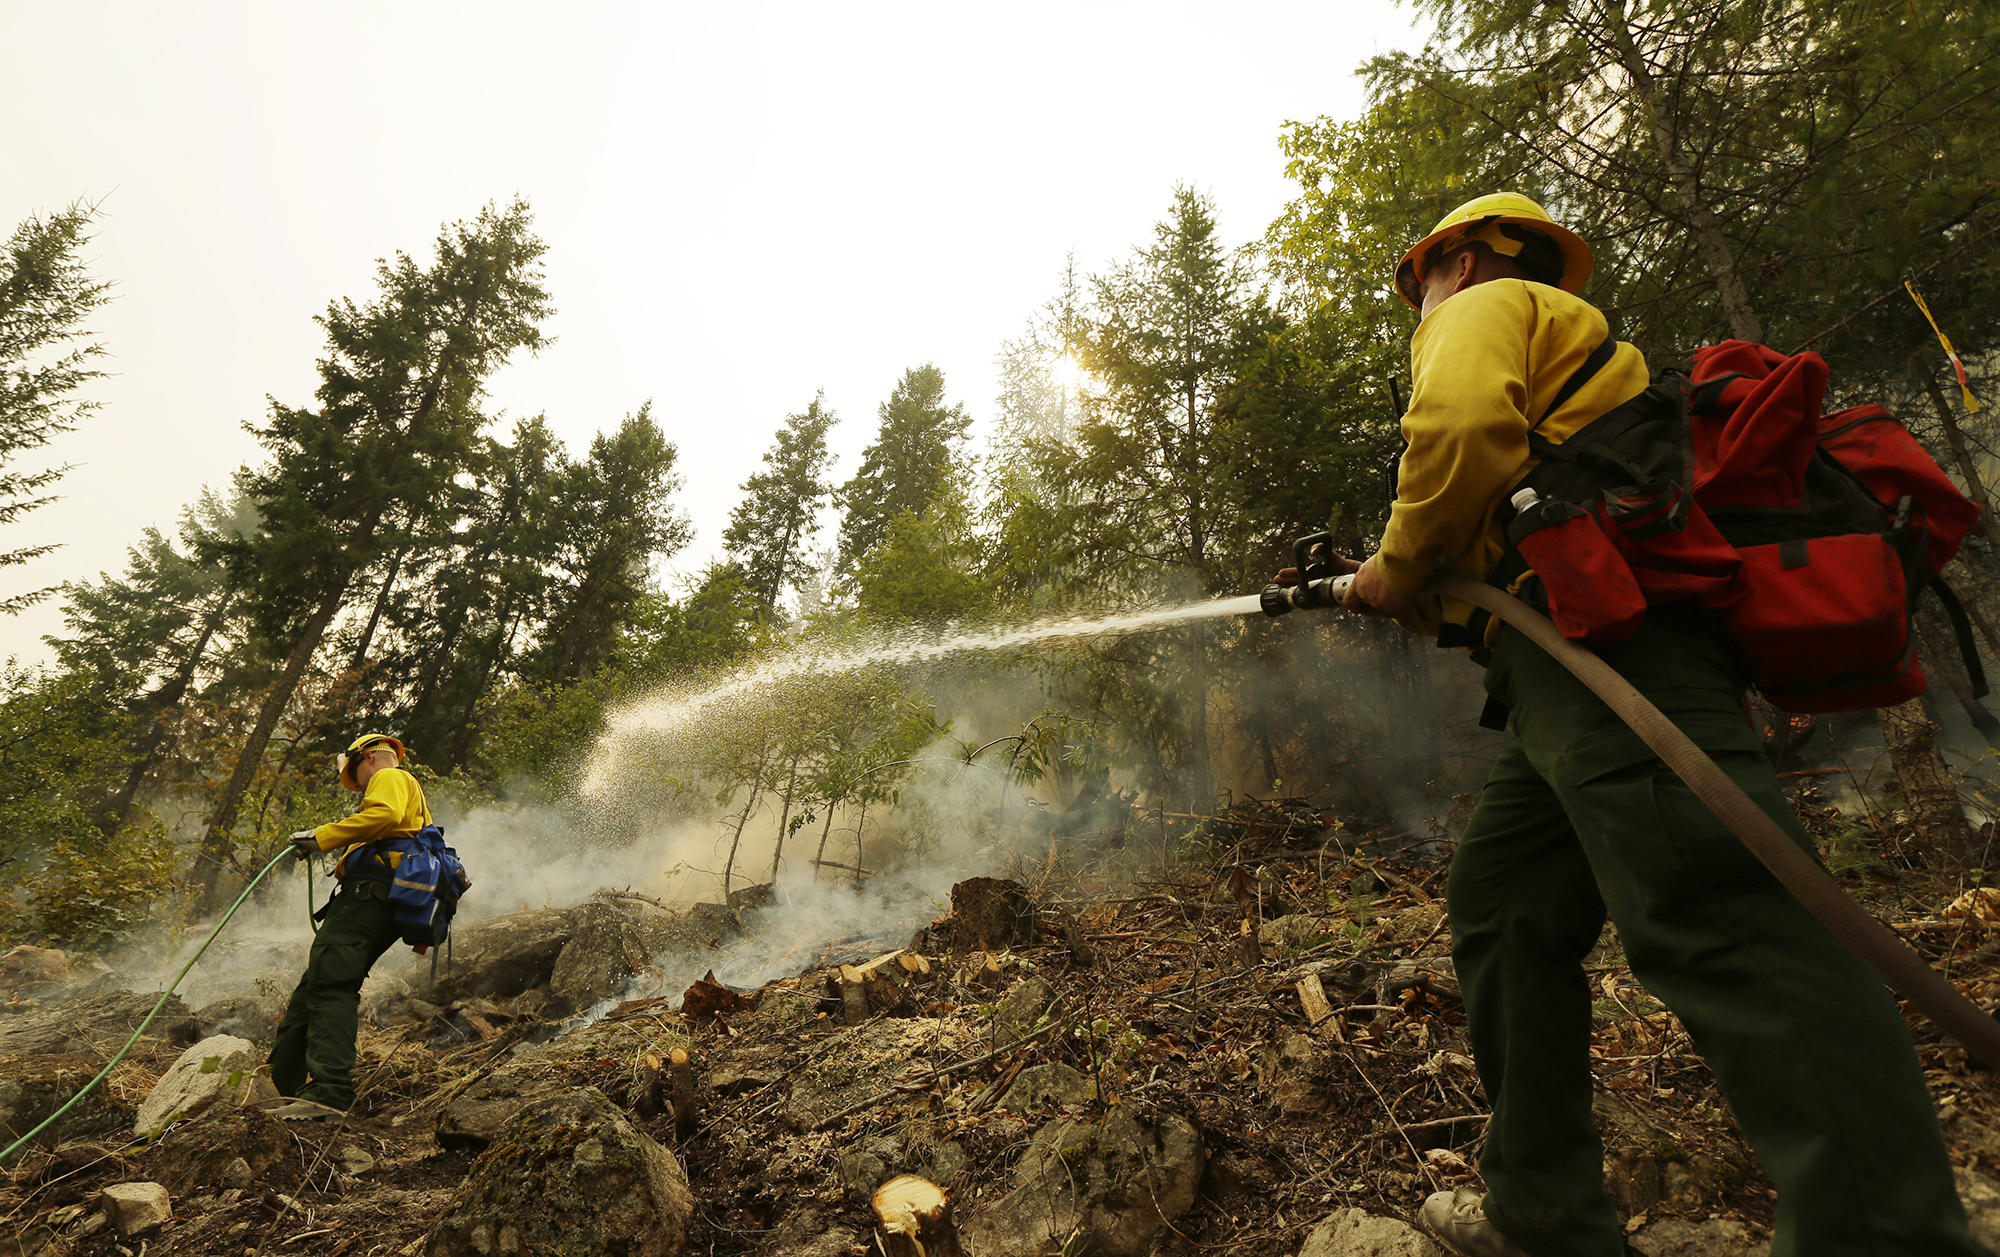 Colby Lyon, of the Central Region Strike Force Team II, sprays a hillside with water as part of the response to a fire near Chelan, Wash. on Aug. 18, 2015.